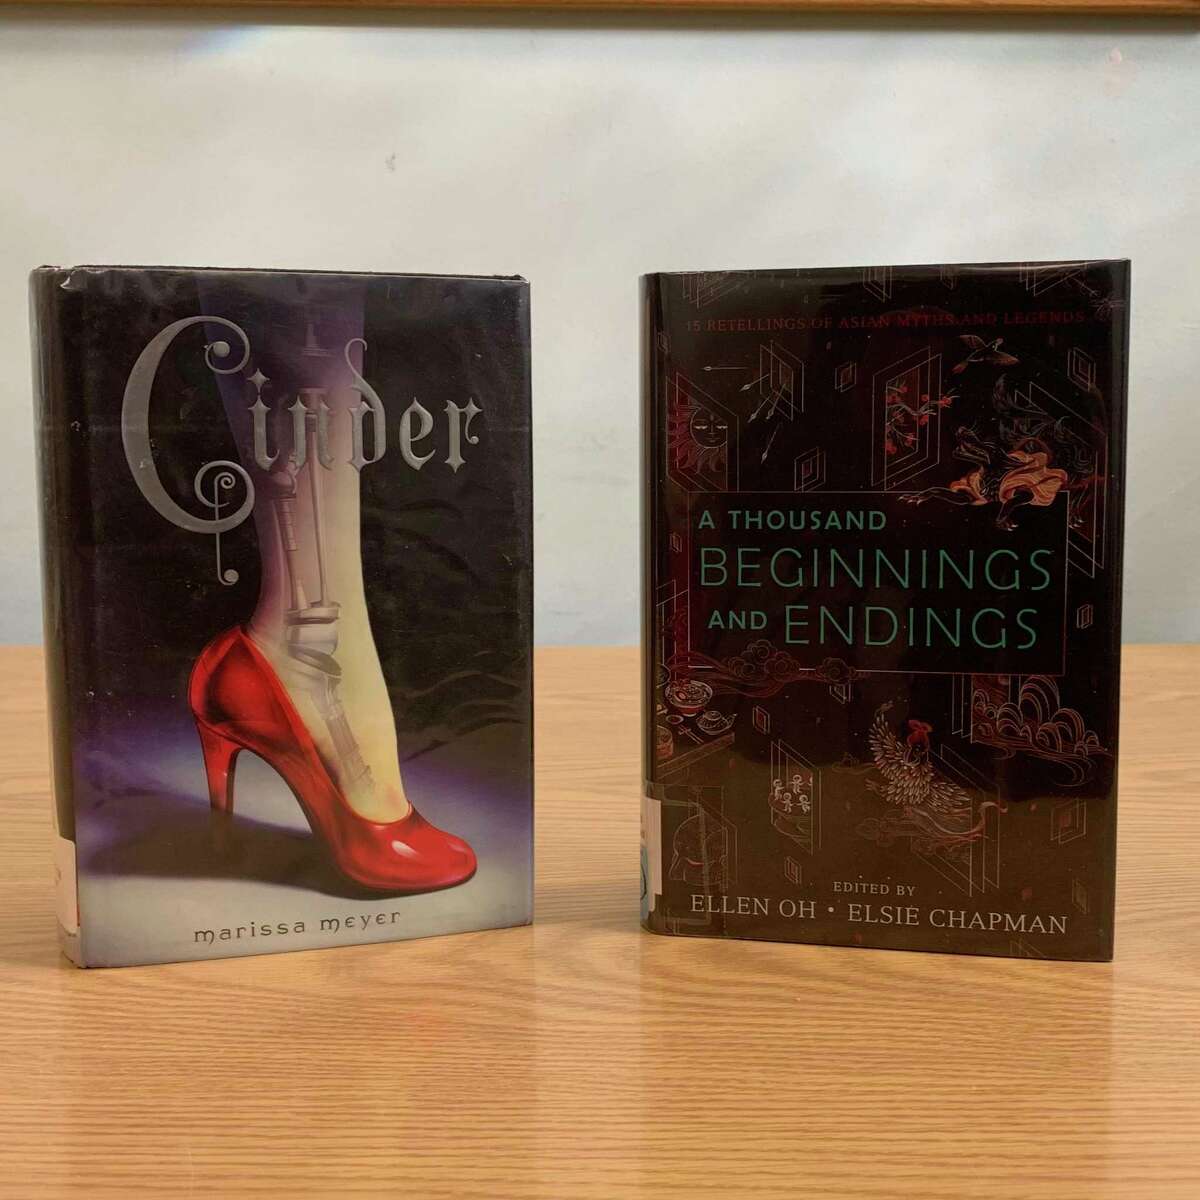 Marissa Meyer gives "Cinderella" a science fiction spin in "Cinder." Meet a cyborg with a mysterious past that falls for a prince while caught in an intergalactic war. (Courtesy photo)